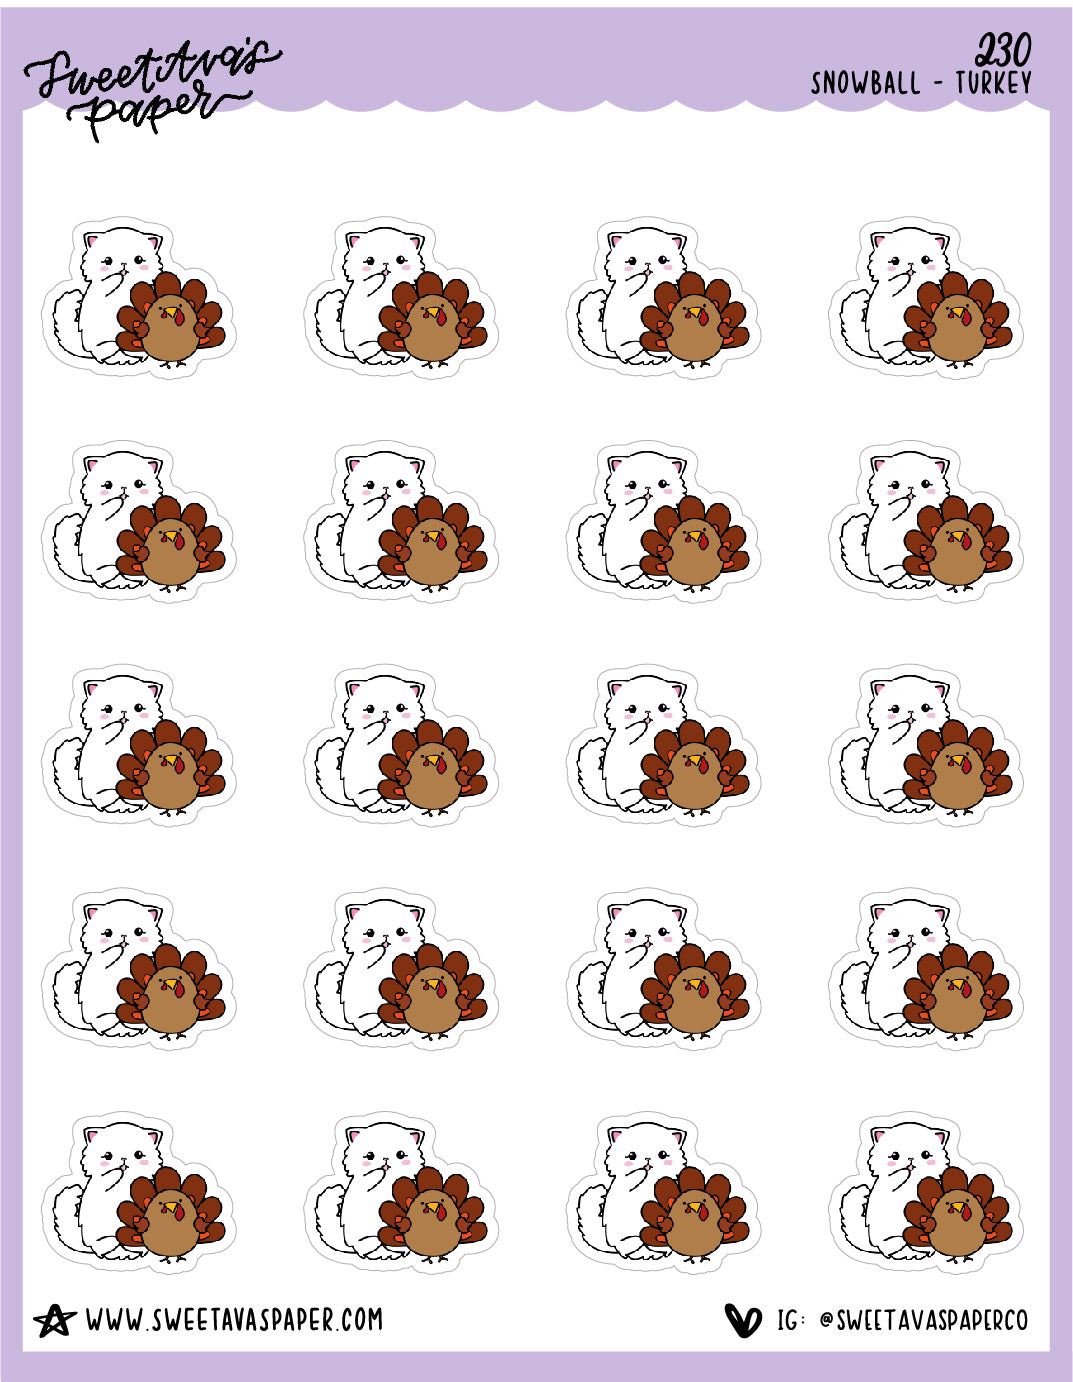 Thanskgiving Turkey Stickers - Snowball The Cat - [230]